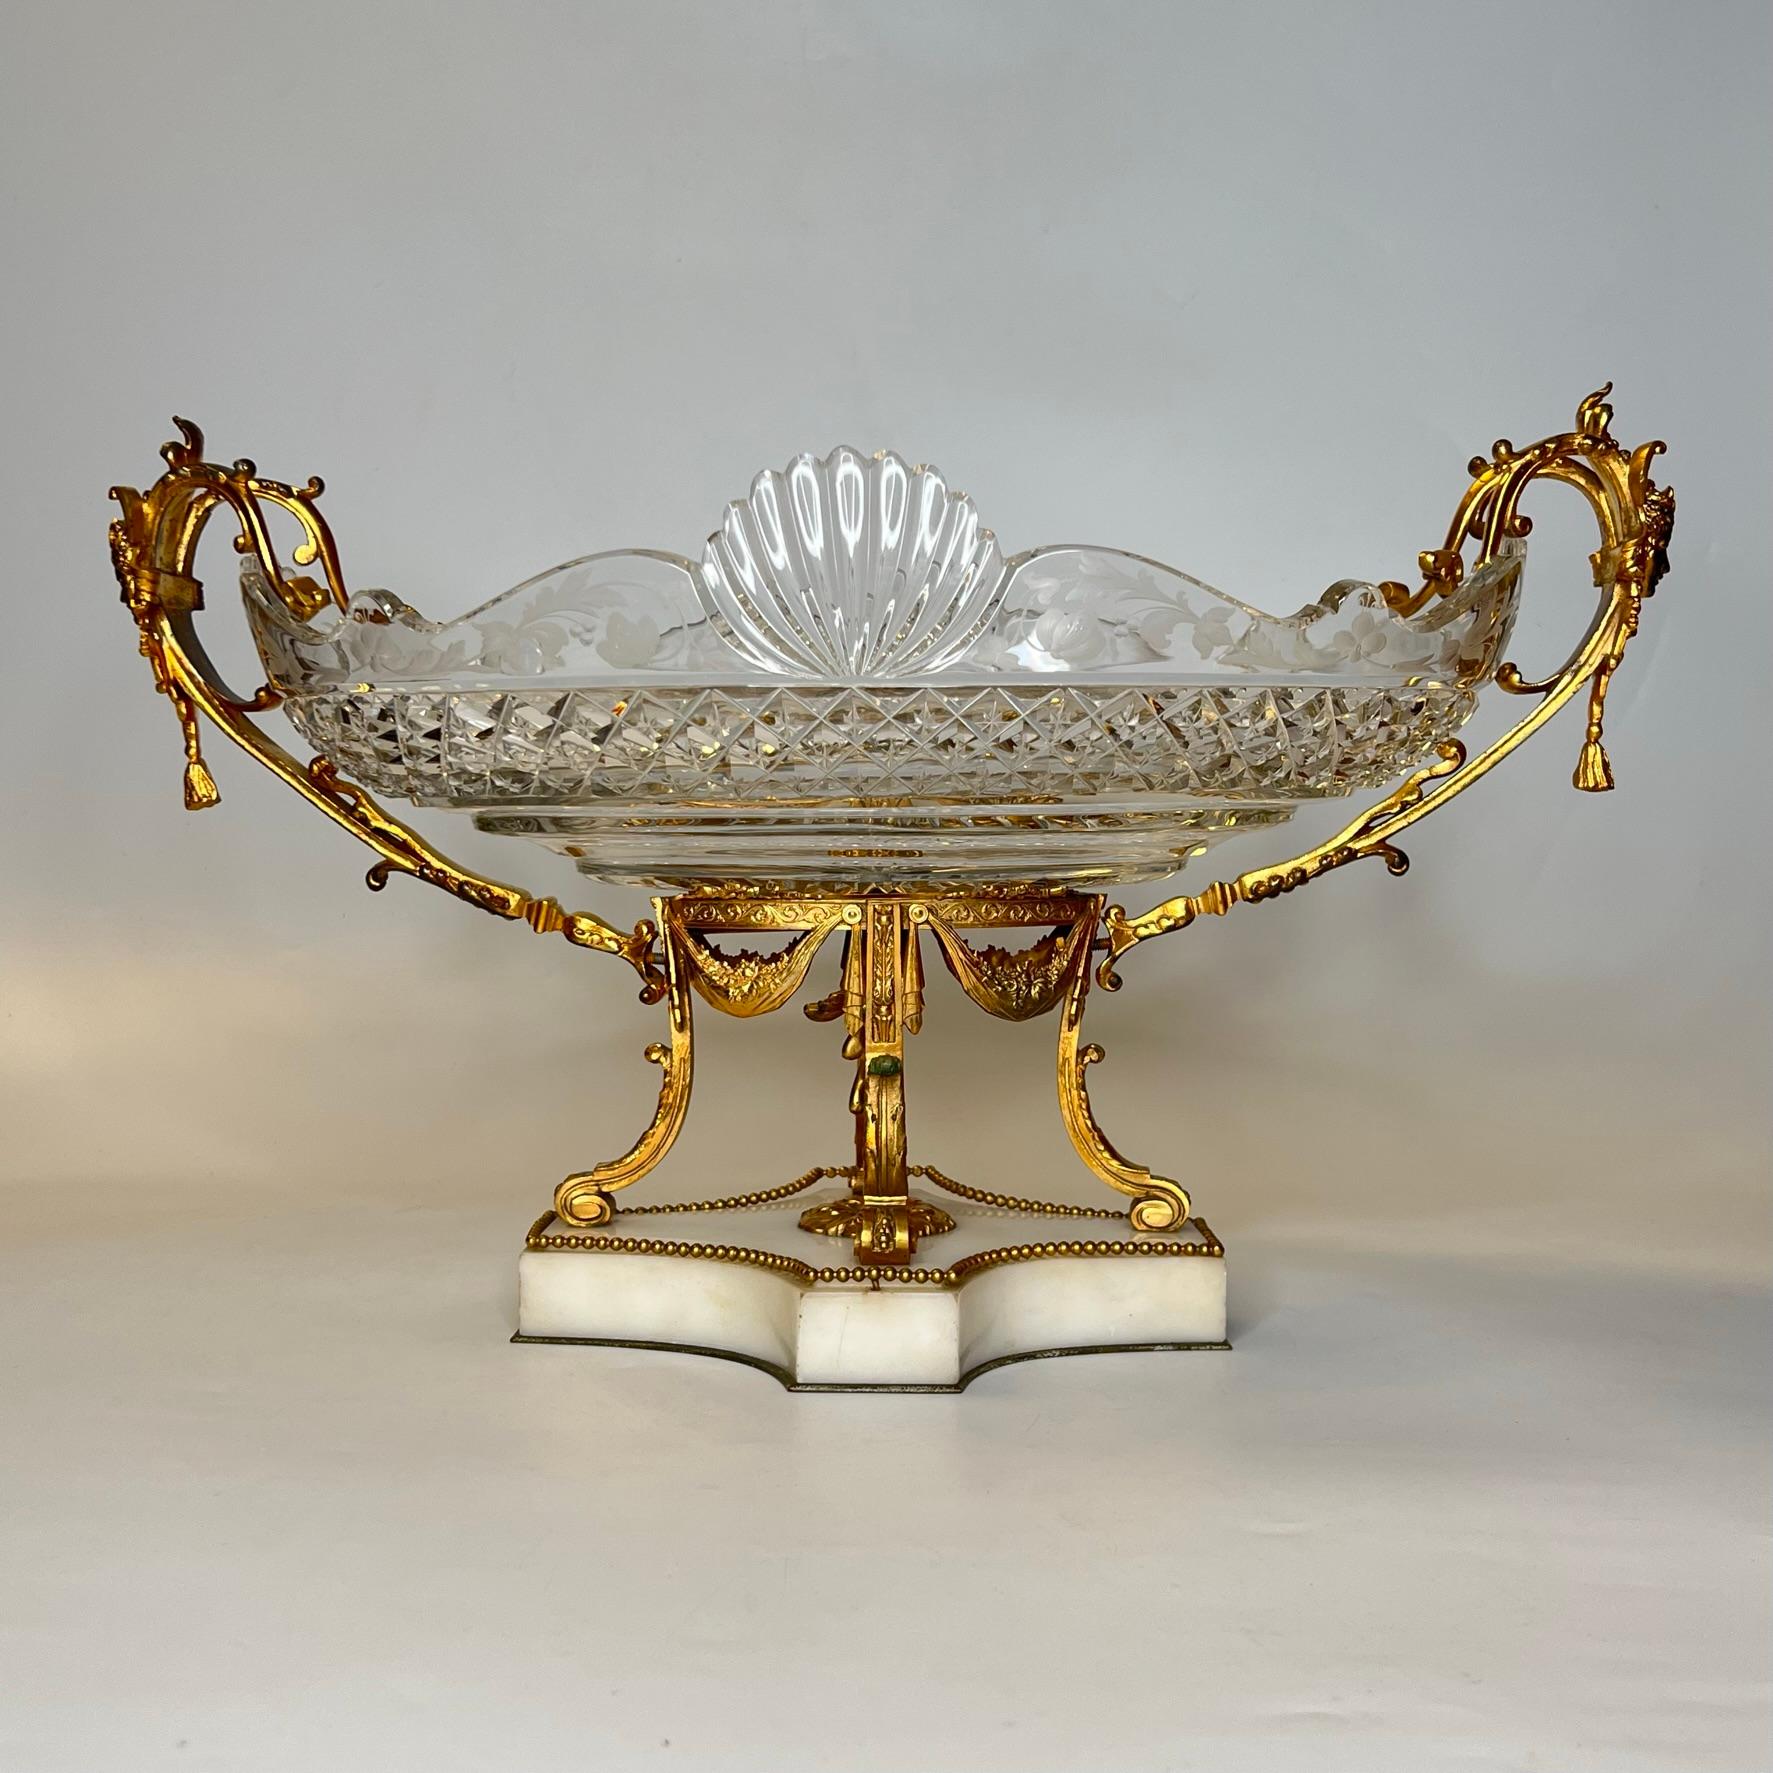 Neoclassical Revival Baccarat Attributed Gilt Bronze and Cut Glass Centerpiece Bowl For Sale